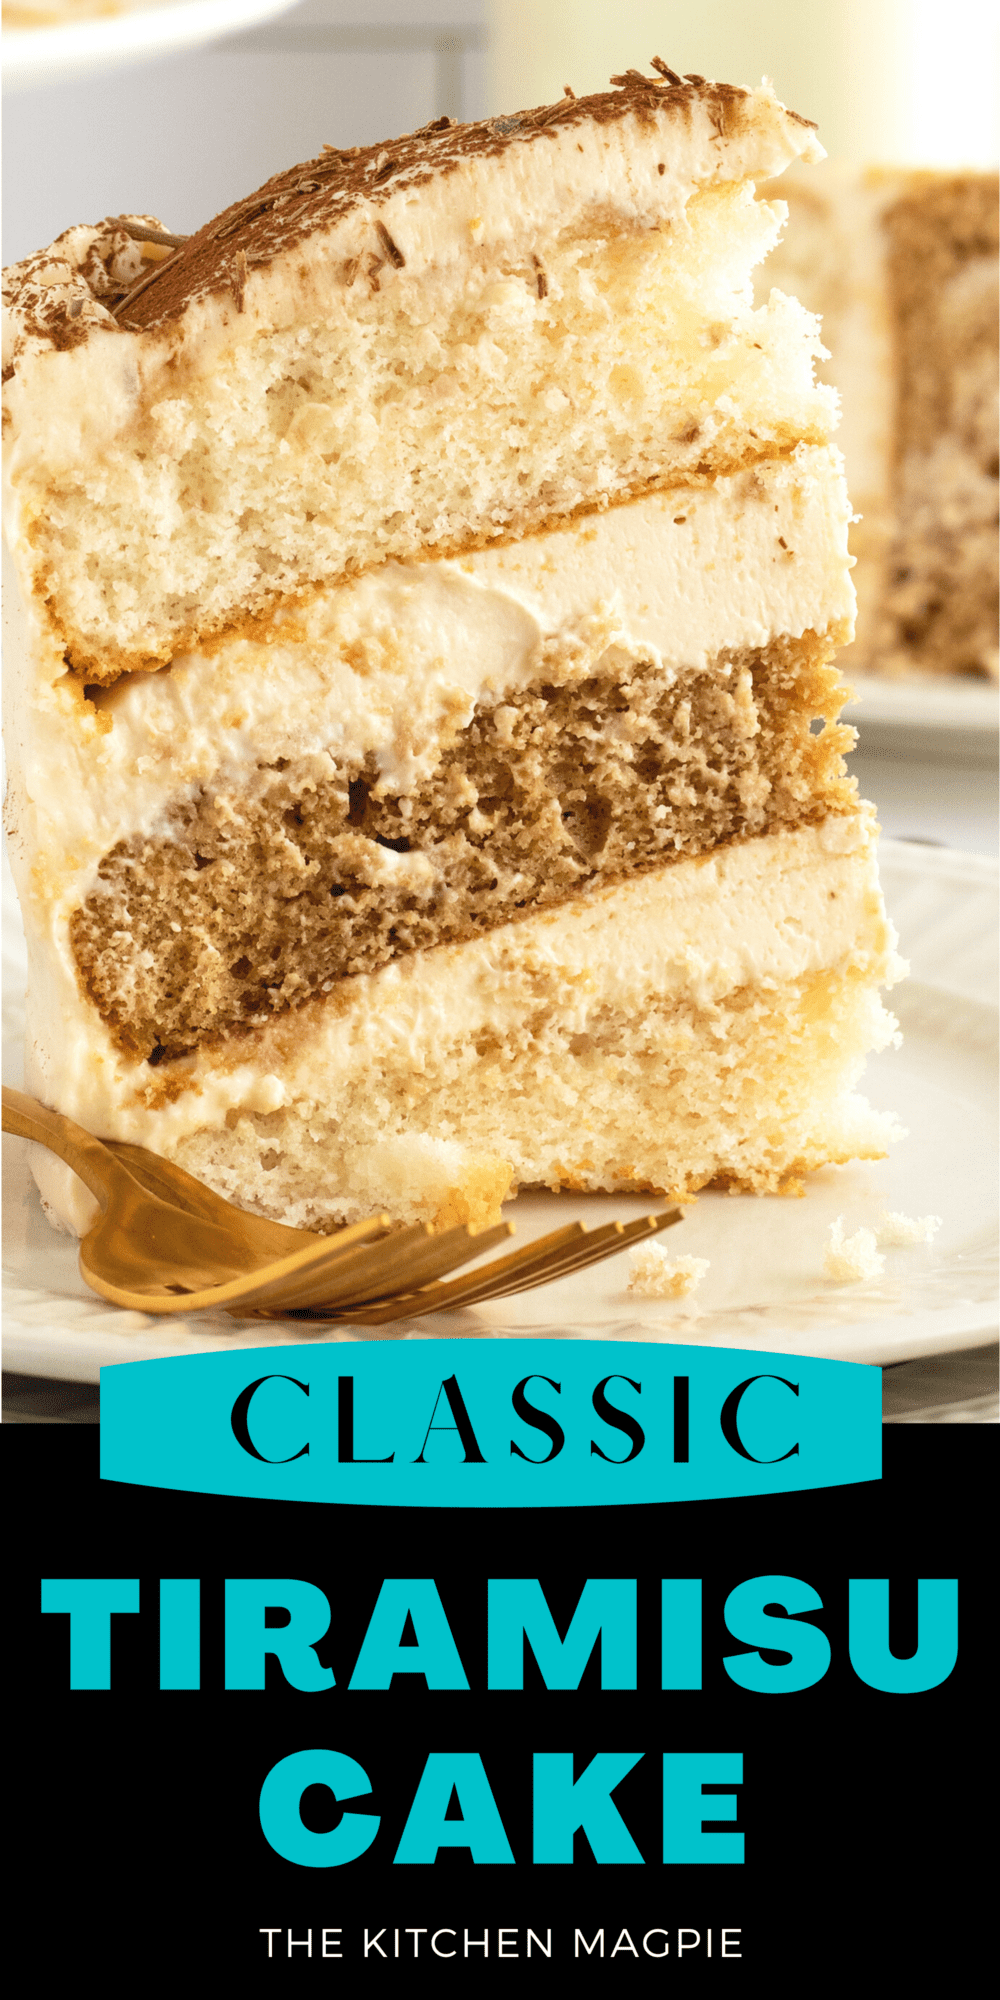 This recipe for tiramisu cake takes a classic tiramisu and levels it up, turning it into a full and complete dessert fit for royalty!